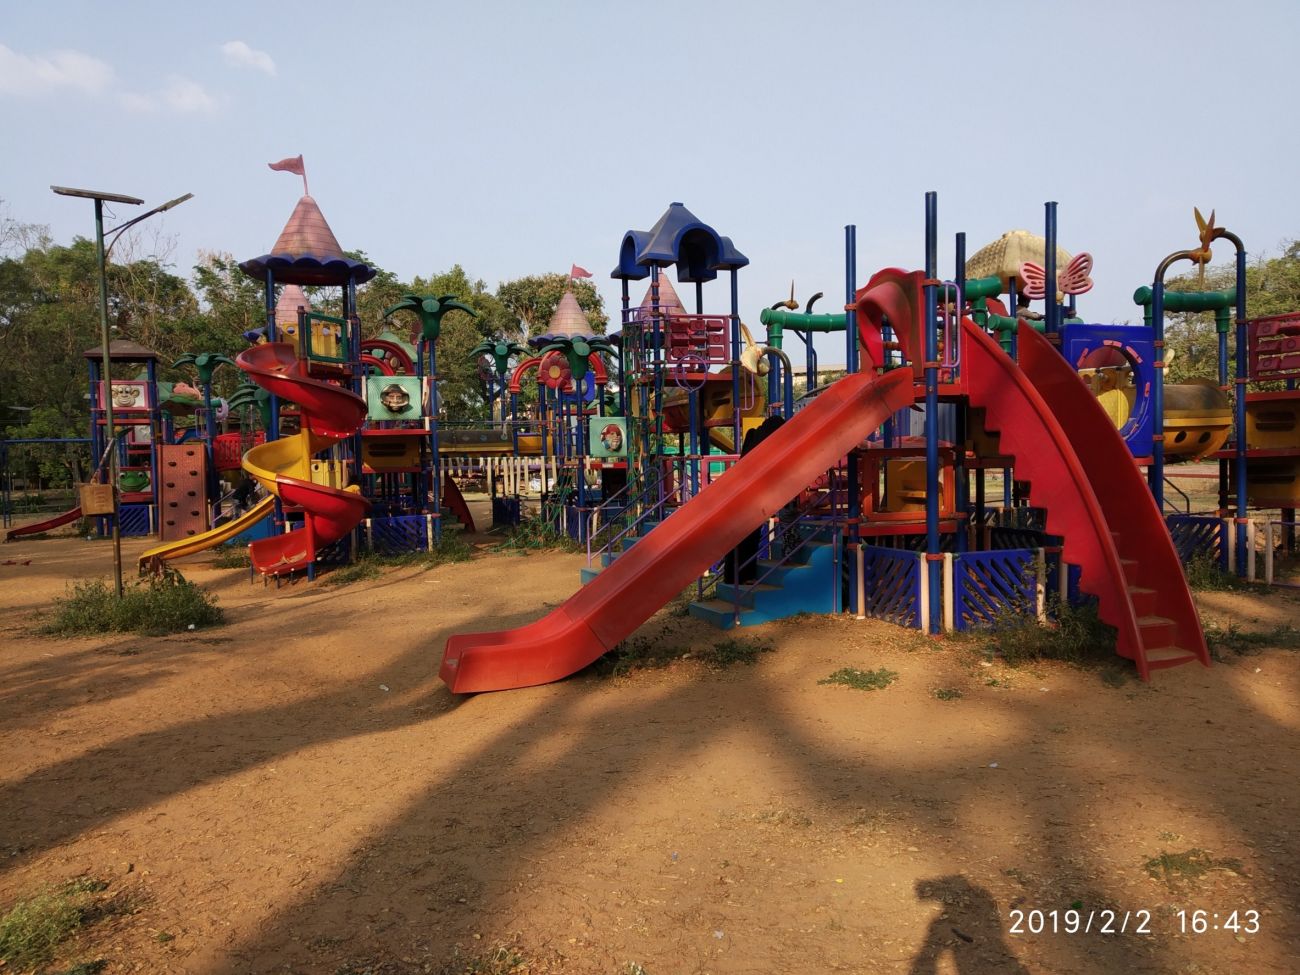 yamaha rx 135 hd wallpapers,playground,outdoor play equipment,playground slide,public space,chute